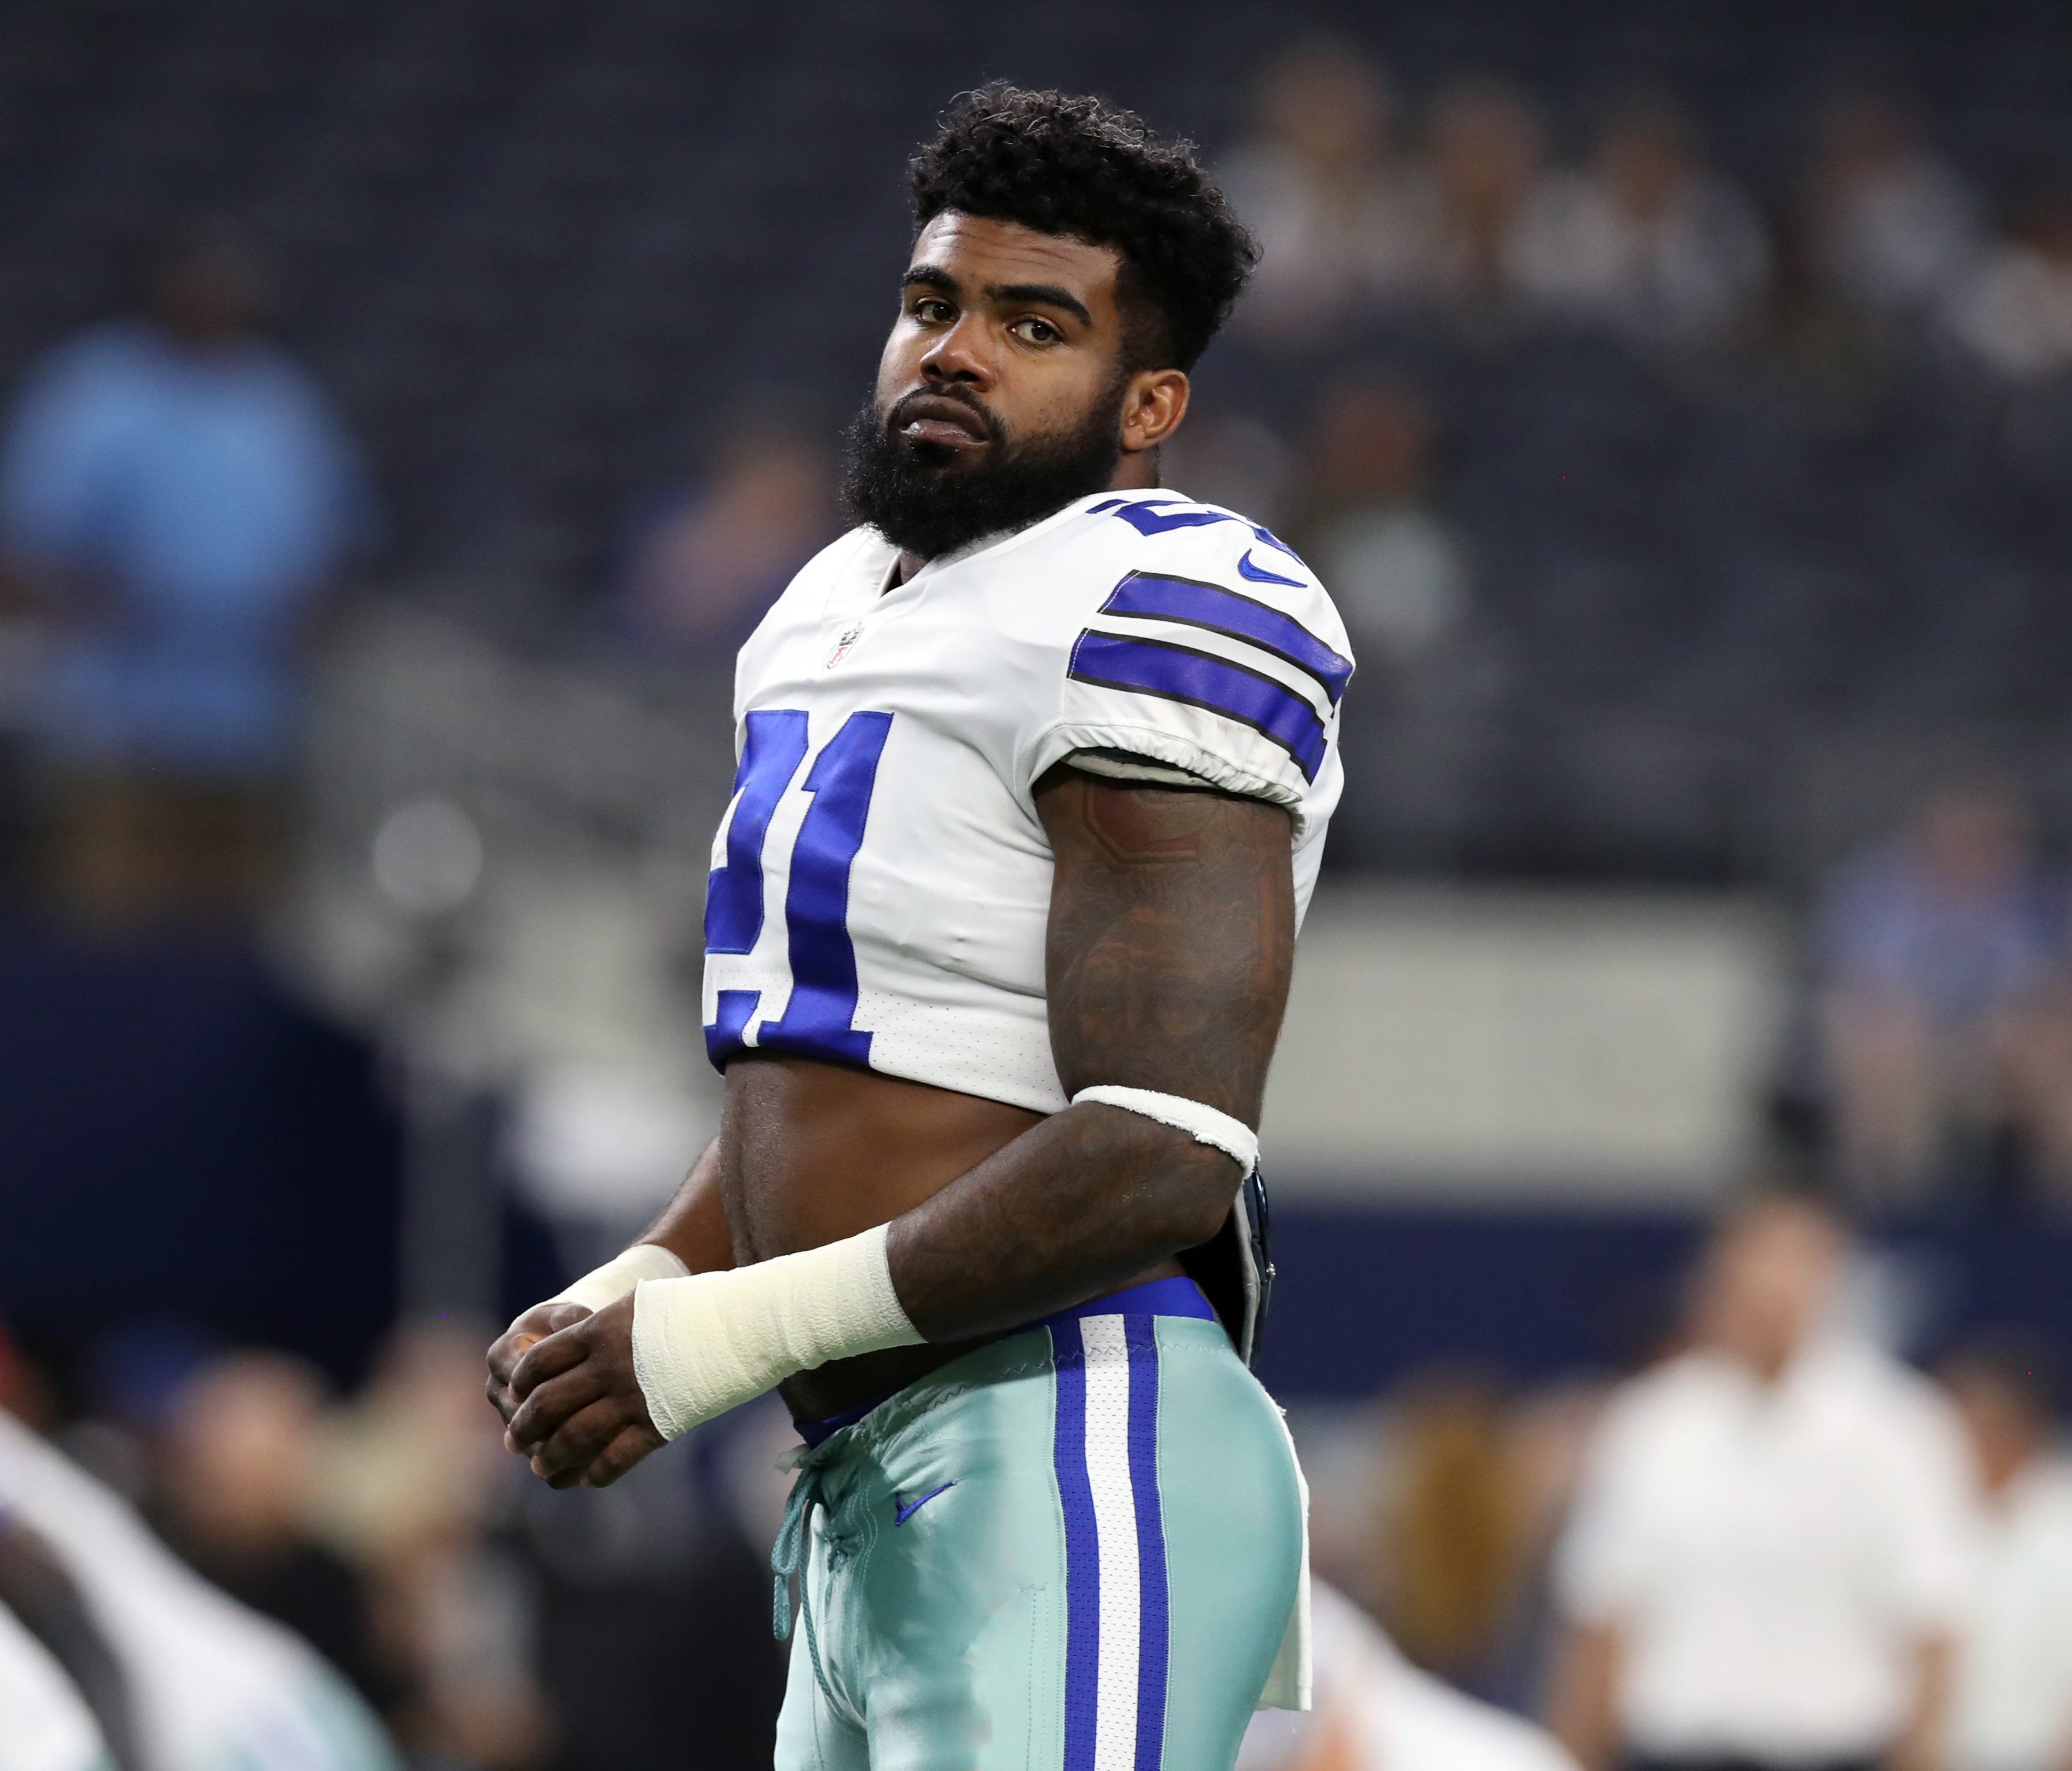 Dallas Cowboys  running back Ezekiel Elliott (21) prior to the game against Indianapolis Colts at AT&T Stadium.